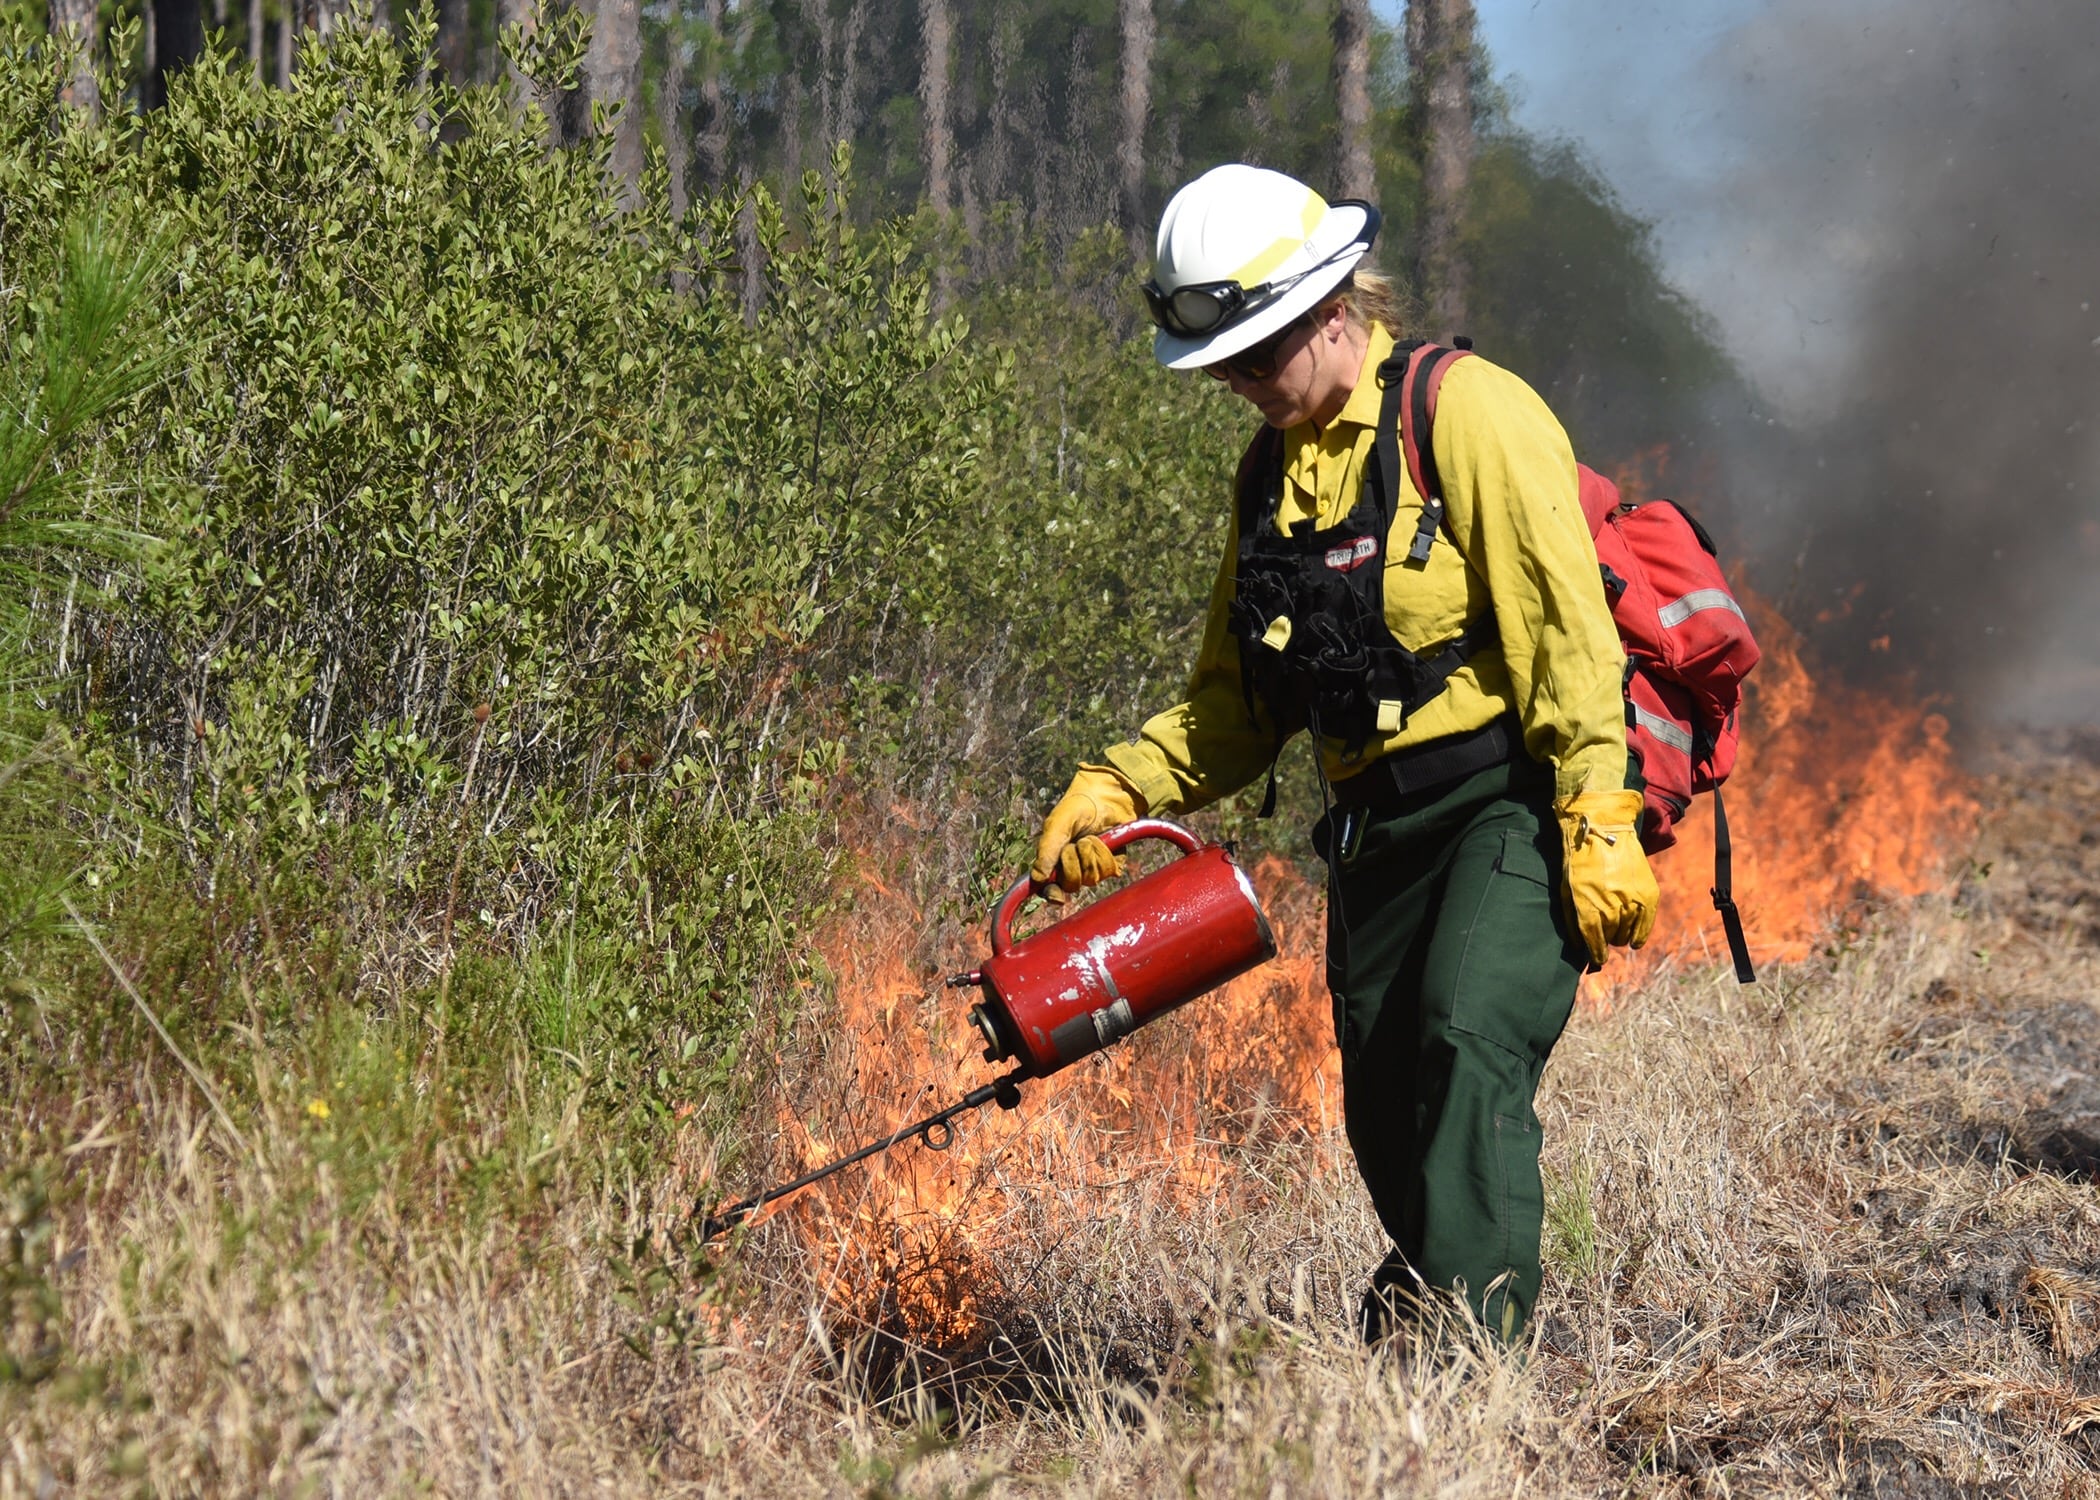 Two prescribed burns slated for this weekend, weather permitting